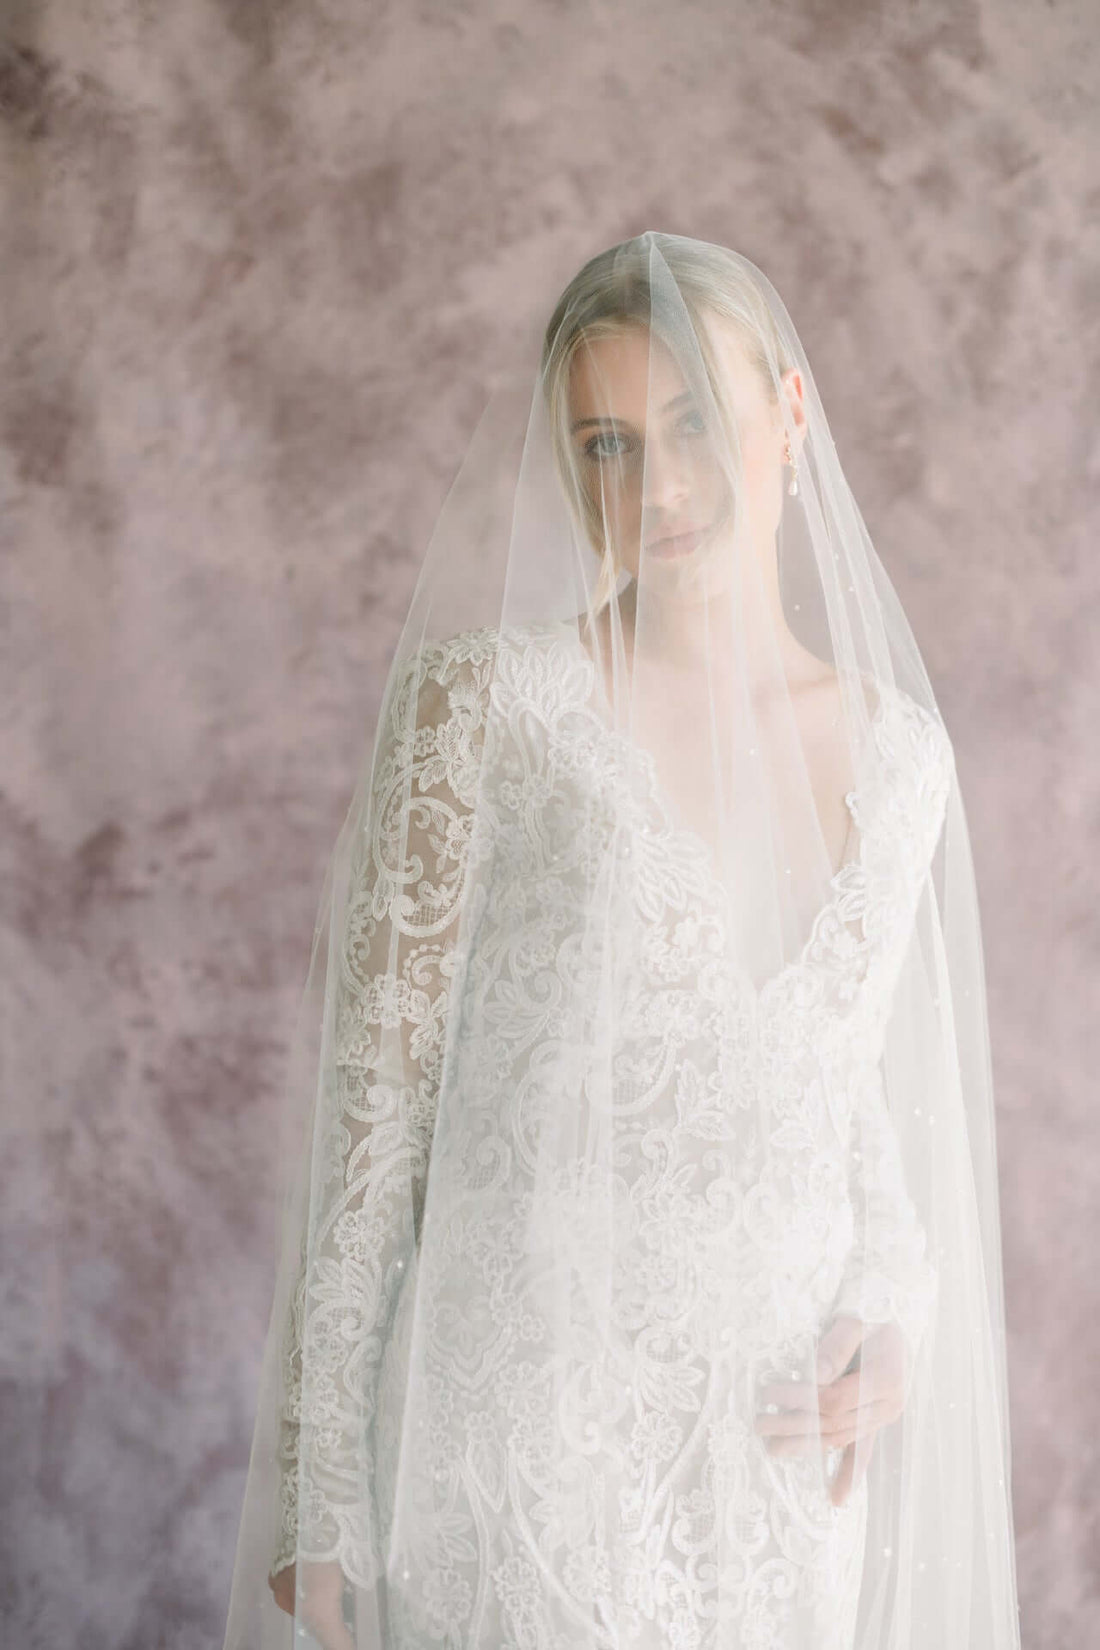 Should your veil be white or ivory?